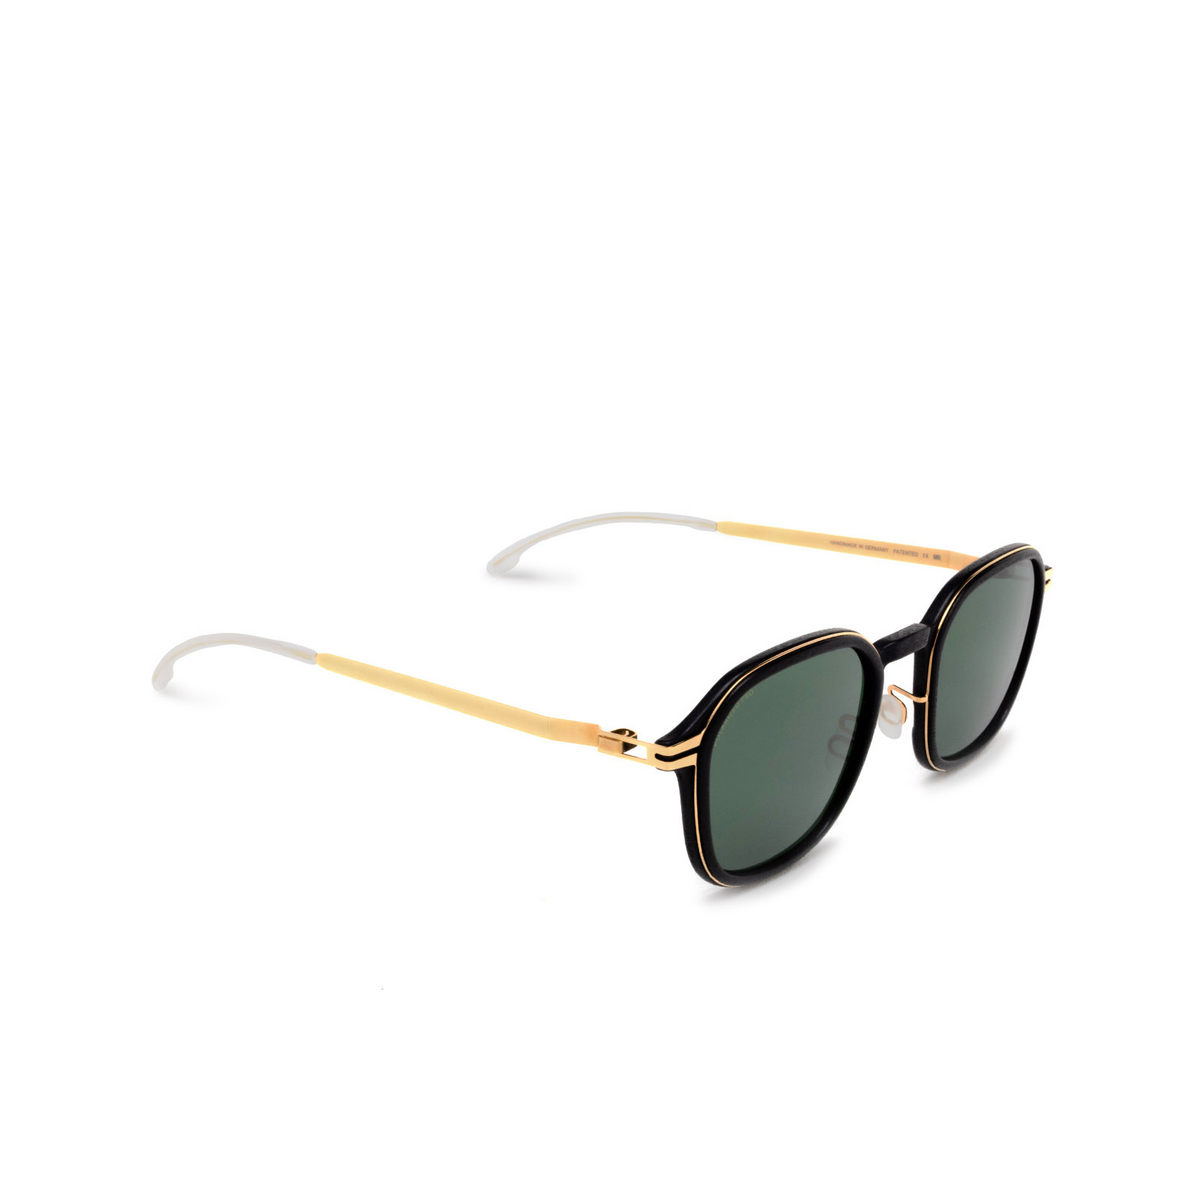 Mykita® Square Sunglasses: Fir color 306 Mh7 Pitch Black/glossy Gold - three-quarters view